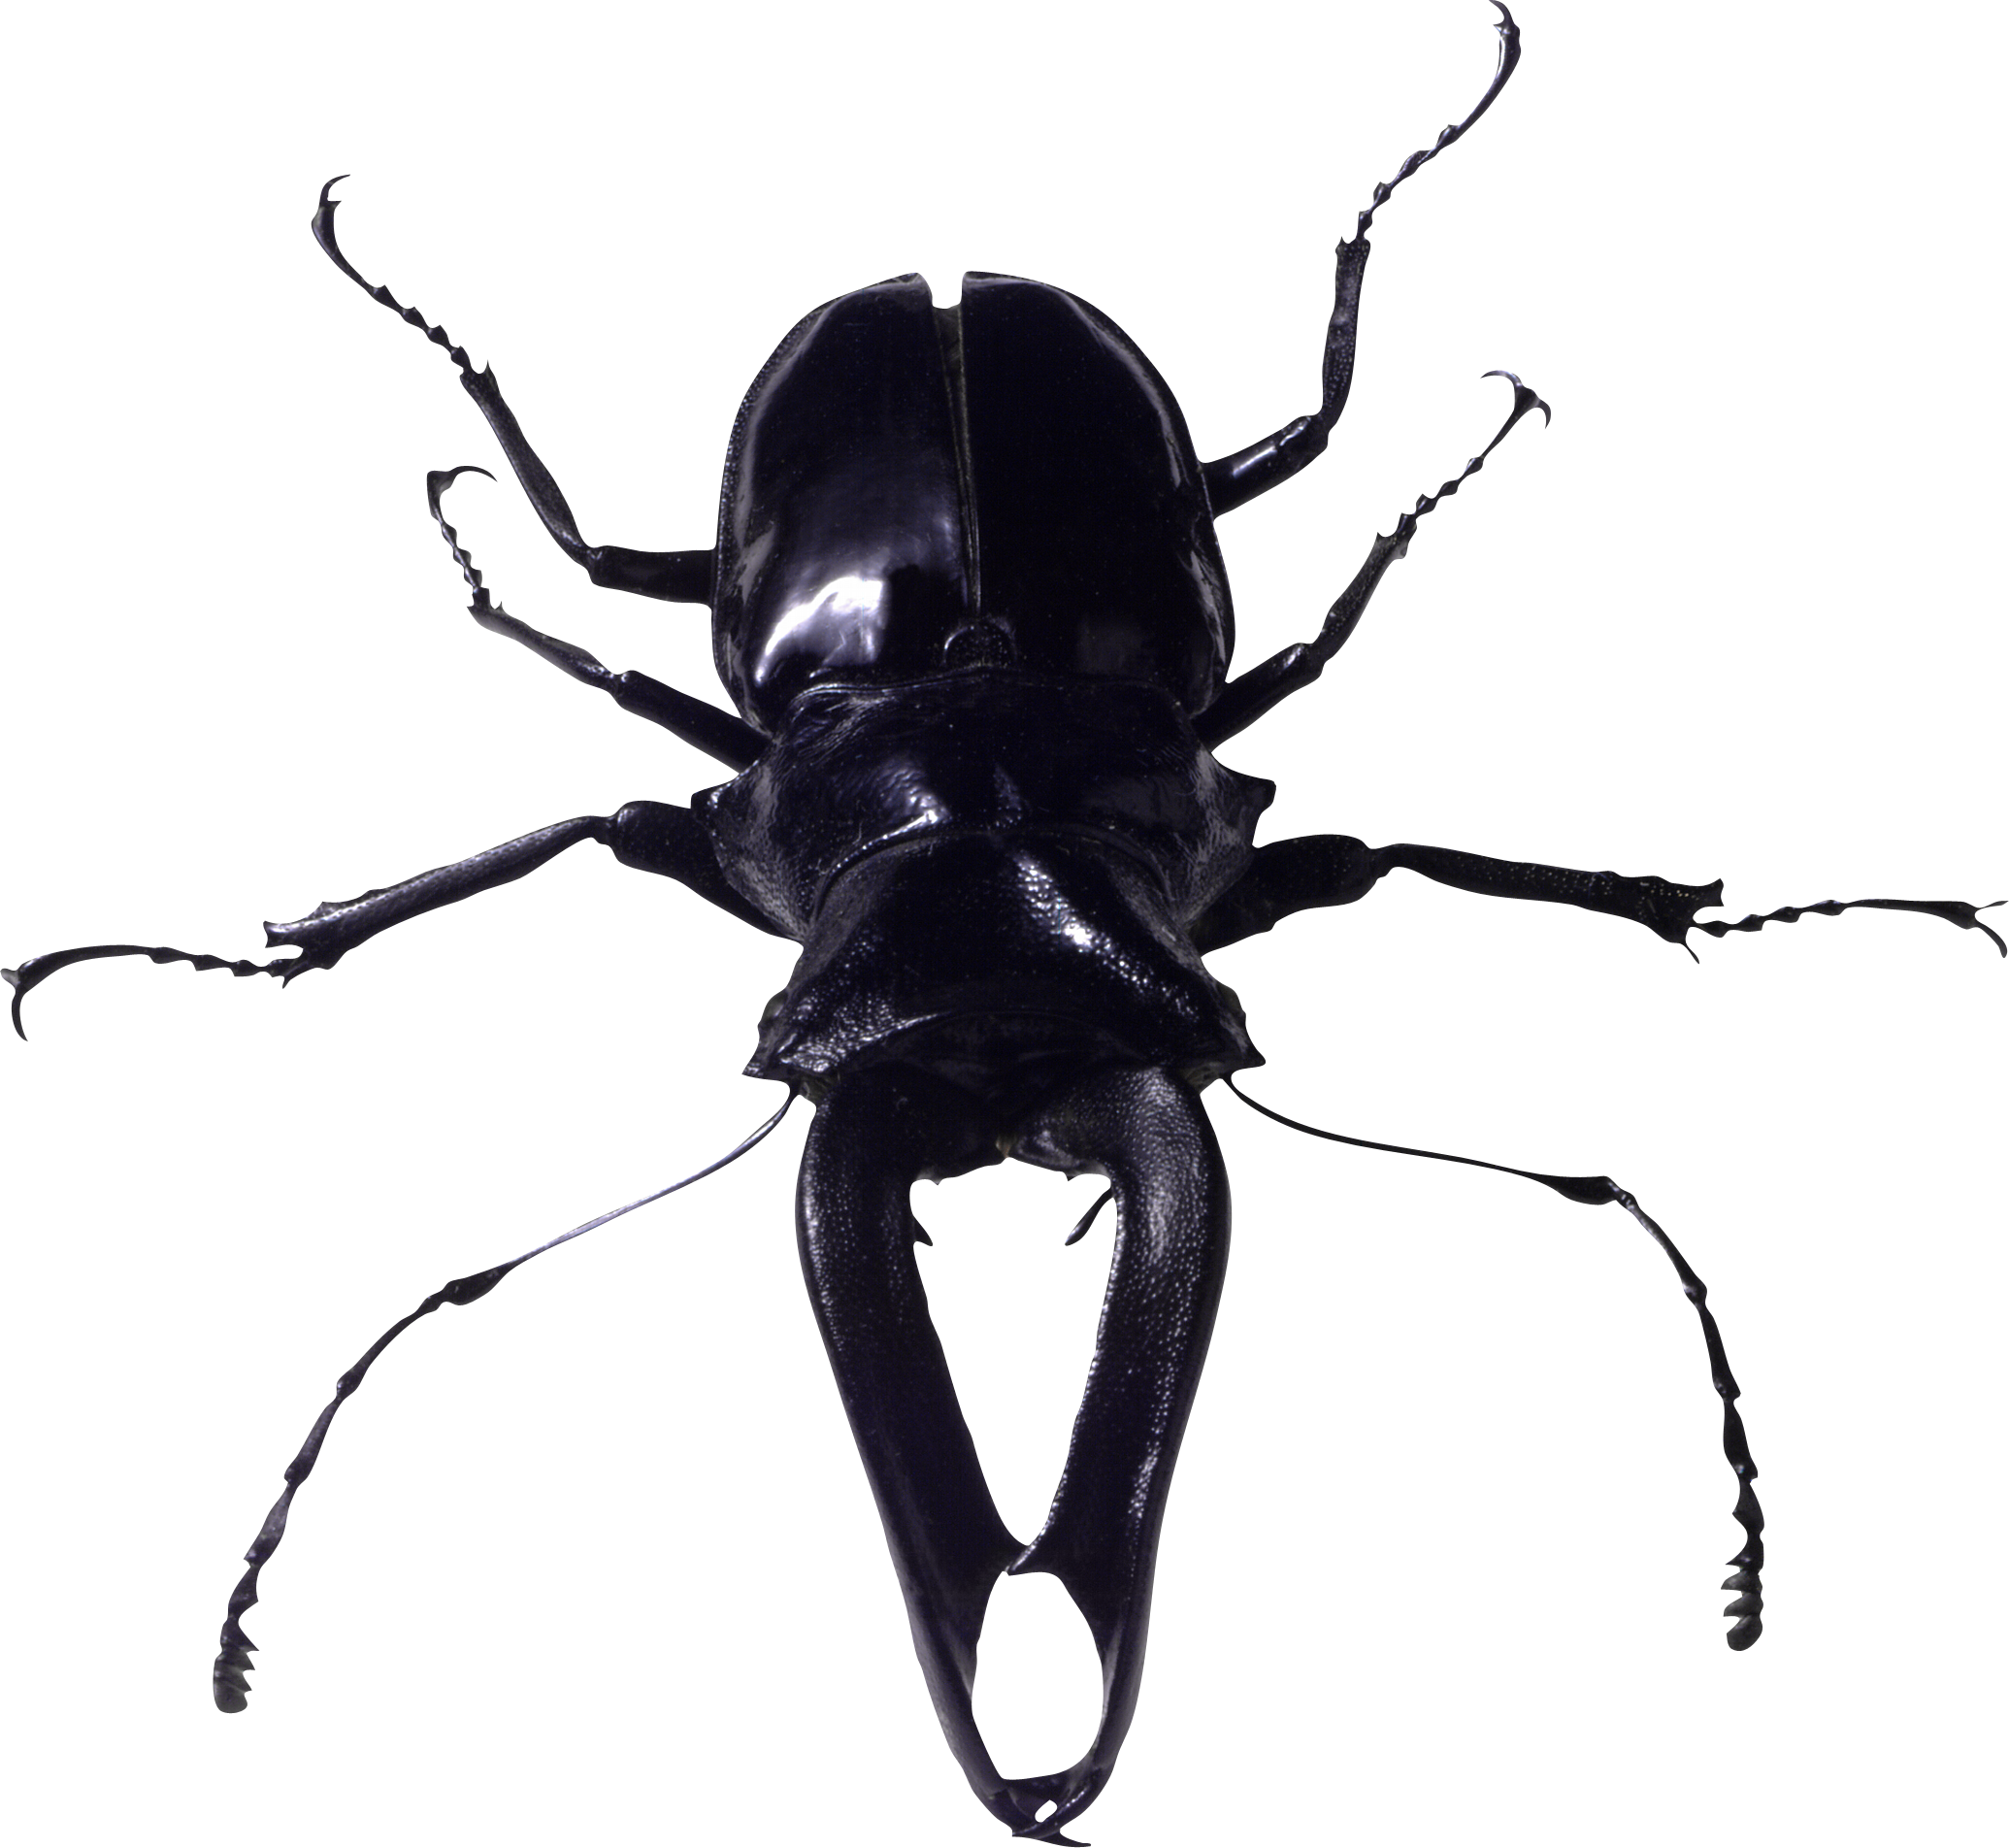 A Black Beetle With Long Legs